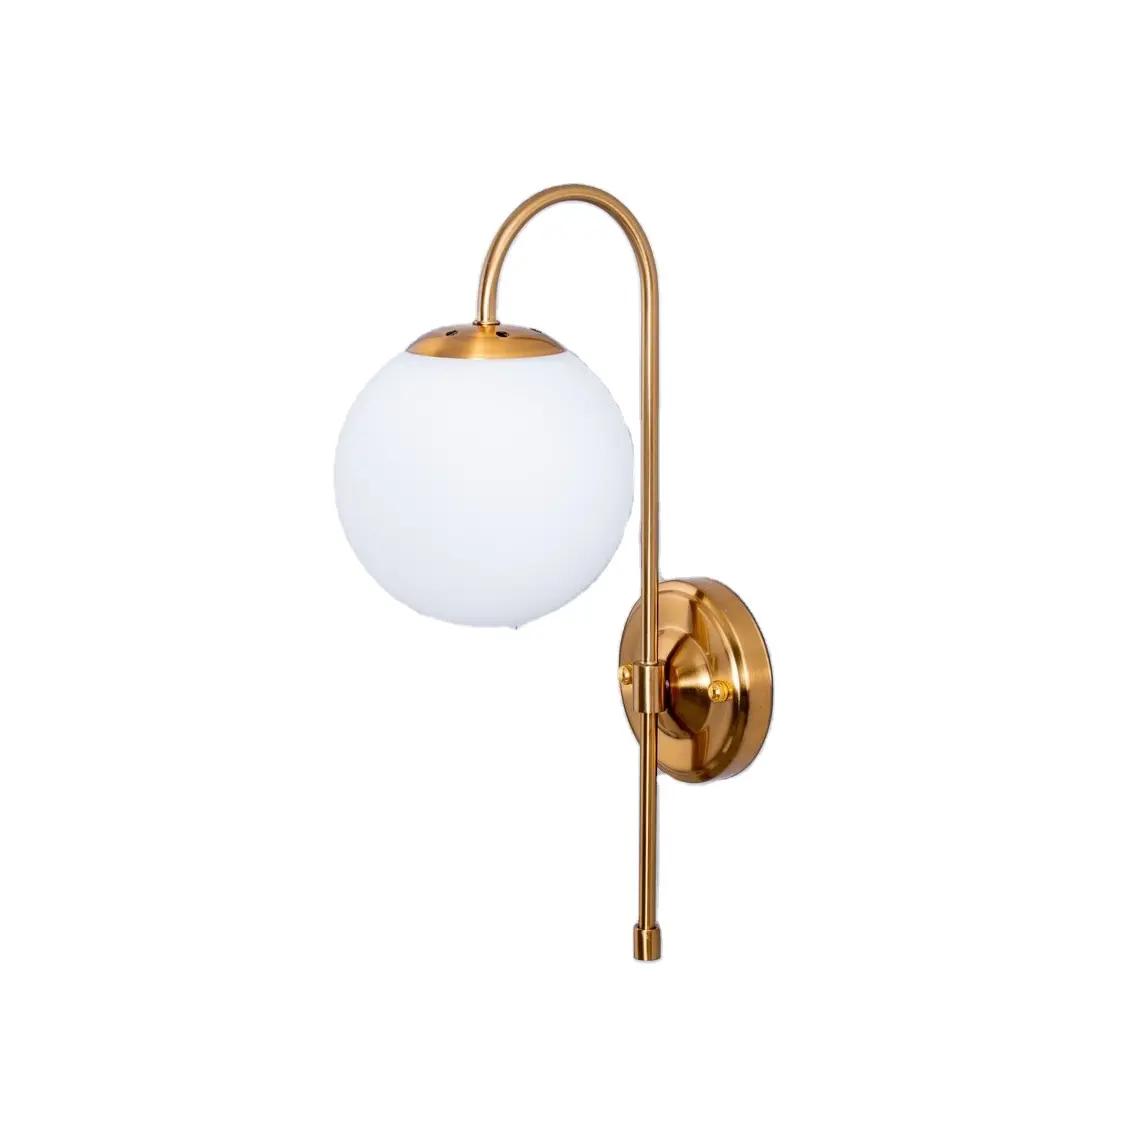 Wall Sconce  Mid-Century Hard Wired Brass One-Light White Globe Wall Sconce Lighting for Bedroom Hallway Living Room